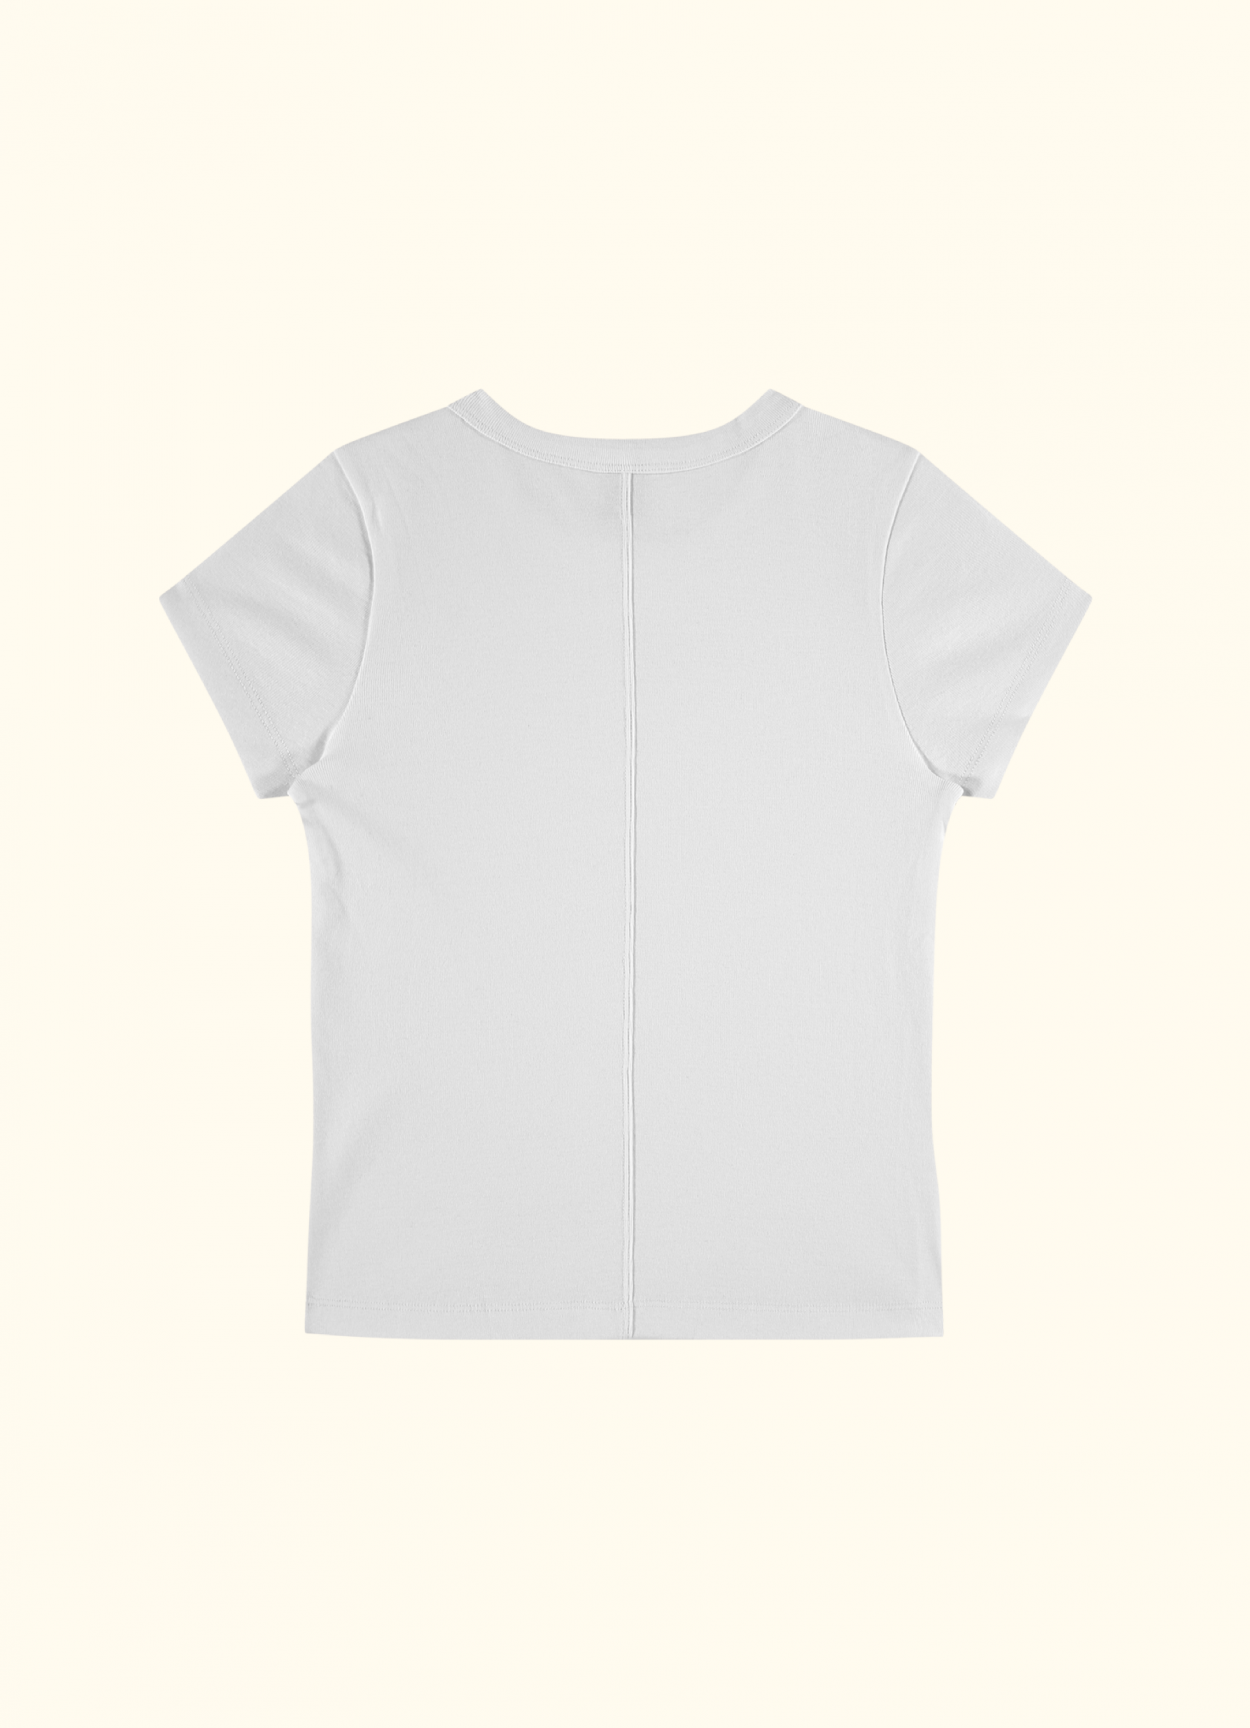 CAR BABY TEE BY FLORE FLORE